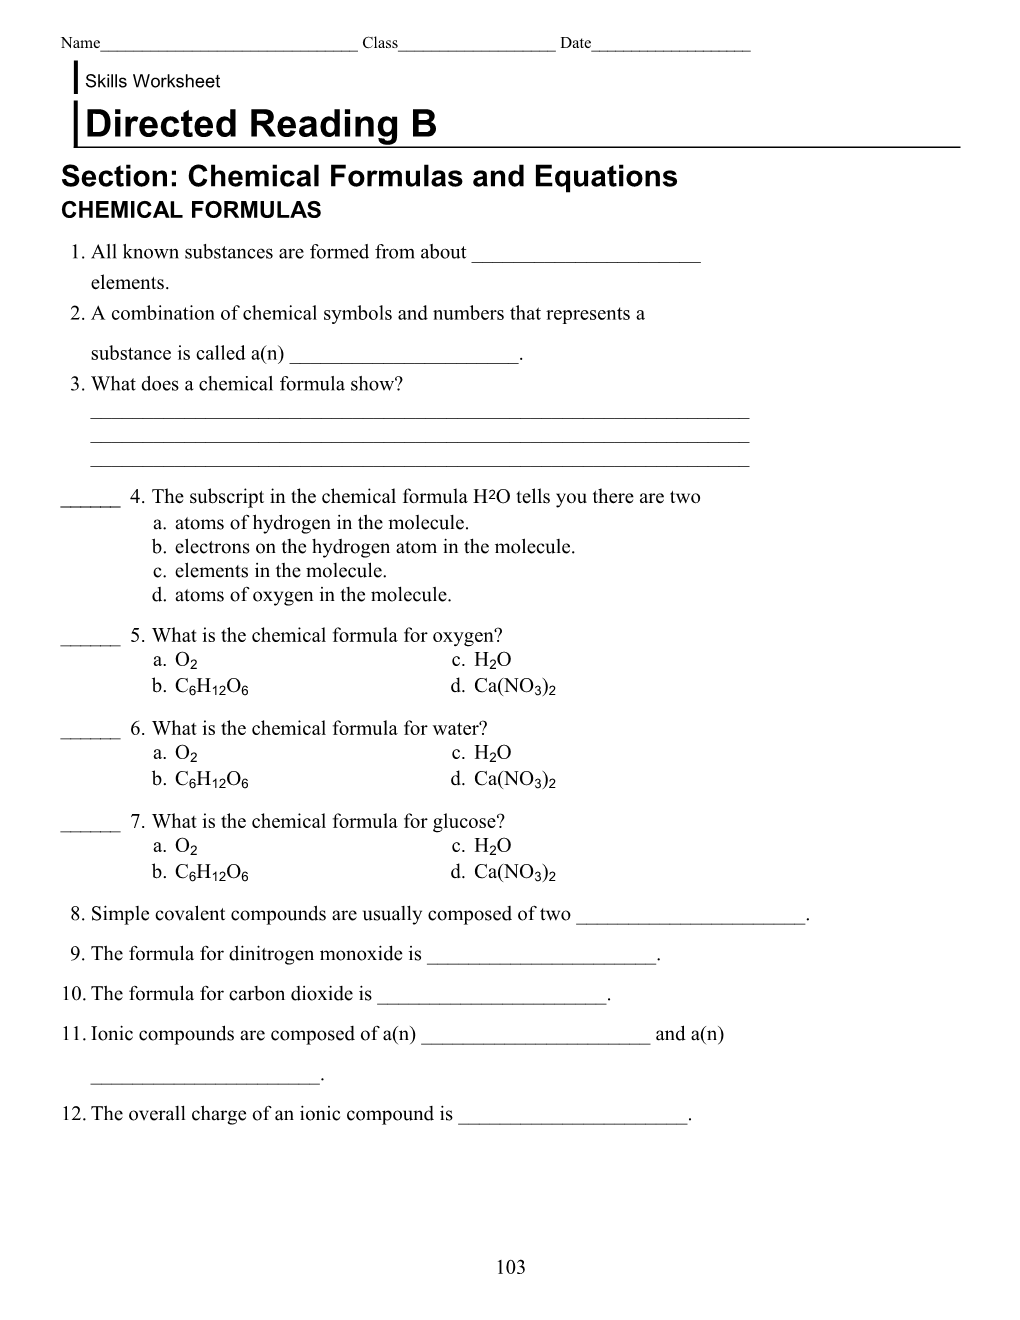 Section: Chemical Formulas and Equations